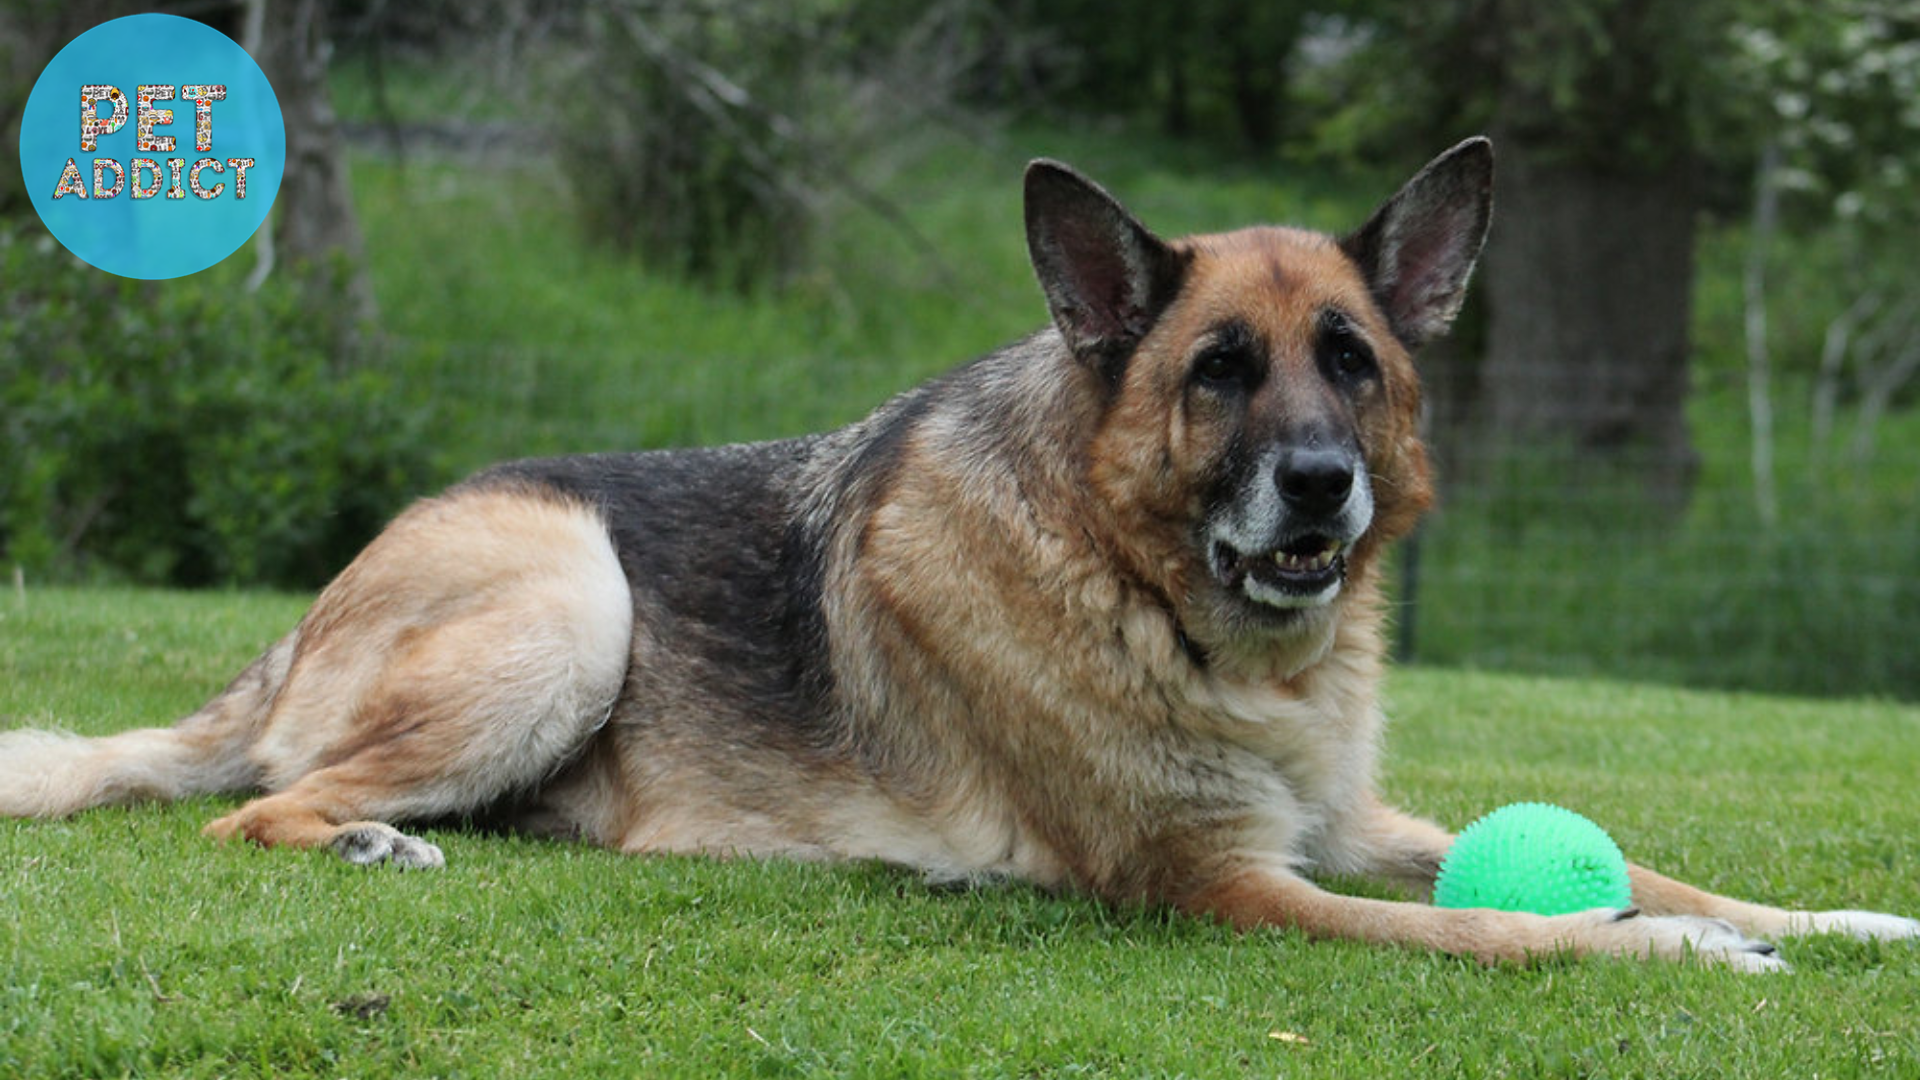 Old German Shepherd Dog: The Grace and Wisdom of Age